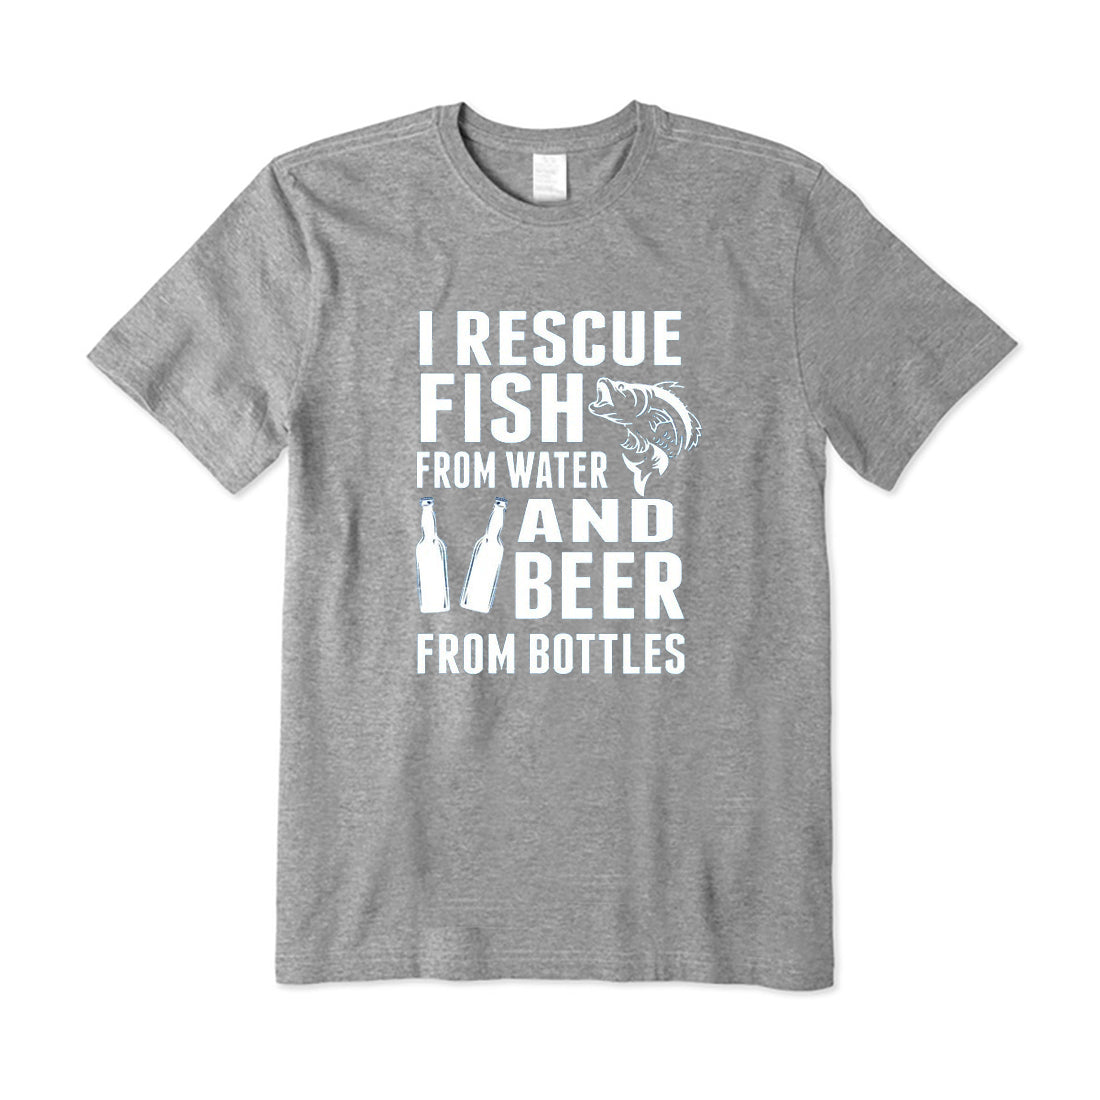 I Rescue Fish From Water and Beer From Bottles T-Shirt